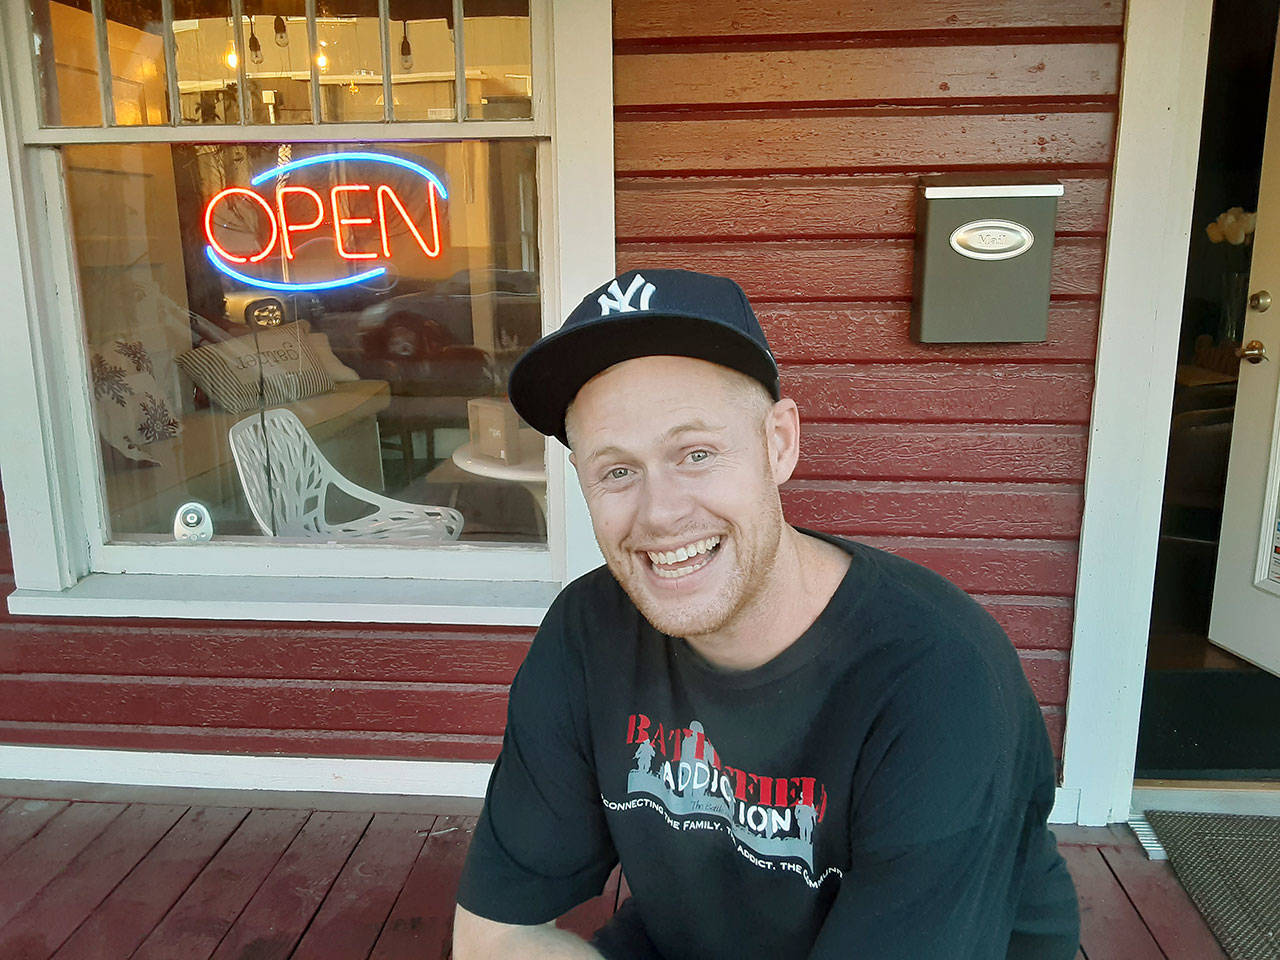 Battlefield Coffee House is brewing up coffee and offering its help again to people beset with addiction, and to their families, says Jordan Bonathan, pictured here, one of those whom Battlefield has helped and today one of its volunteers. ROBERT WHALE, Auburn Reporter